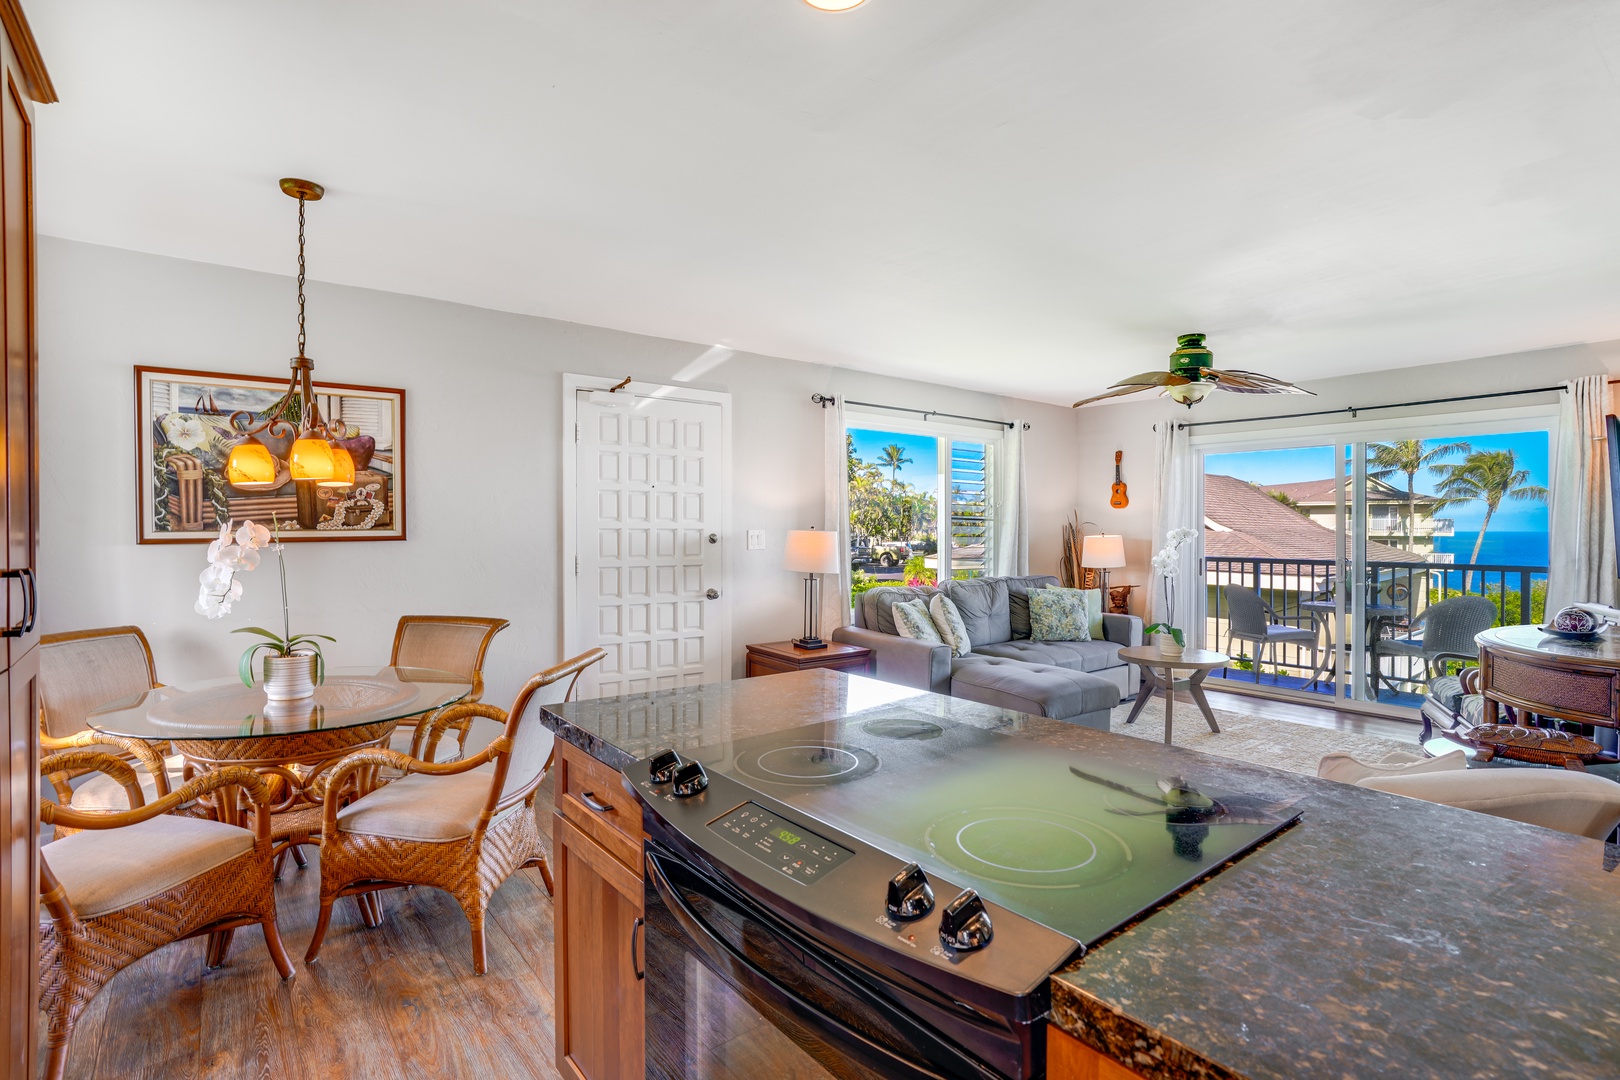 Princeville Vacation Rentals, Alii Kai 7201 - Meal prep is a delight in a kitchen that opens up to bright living spaces and relaxing views